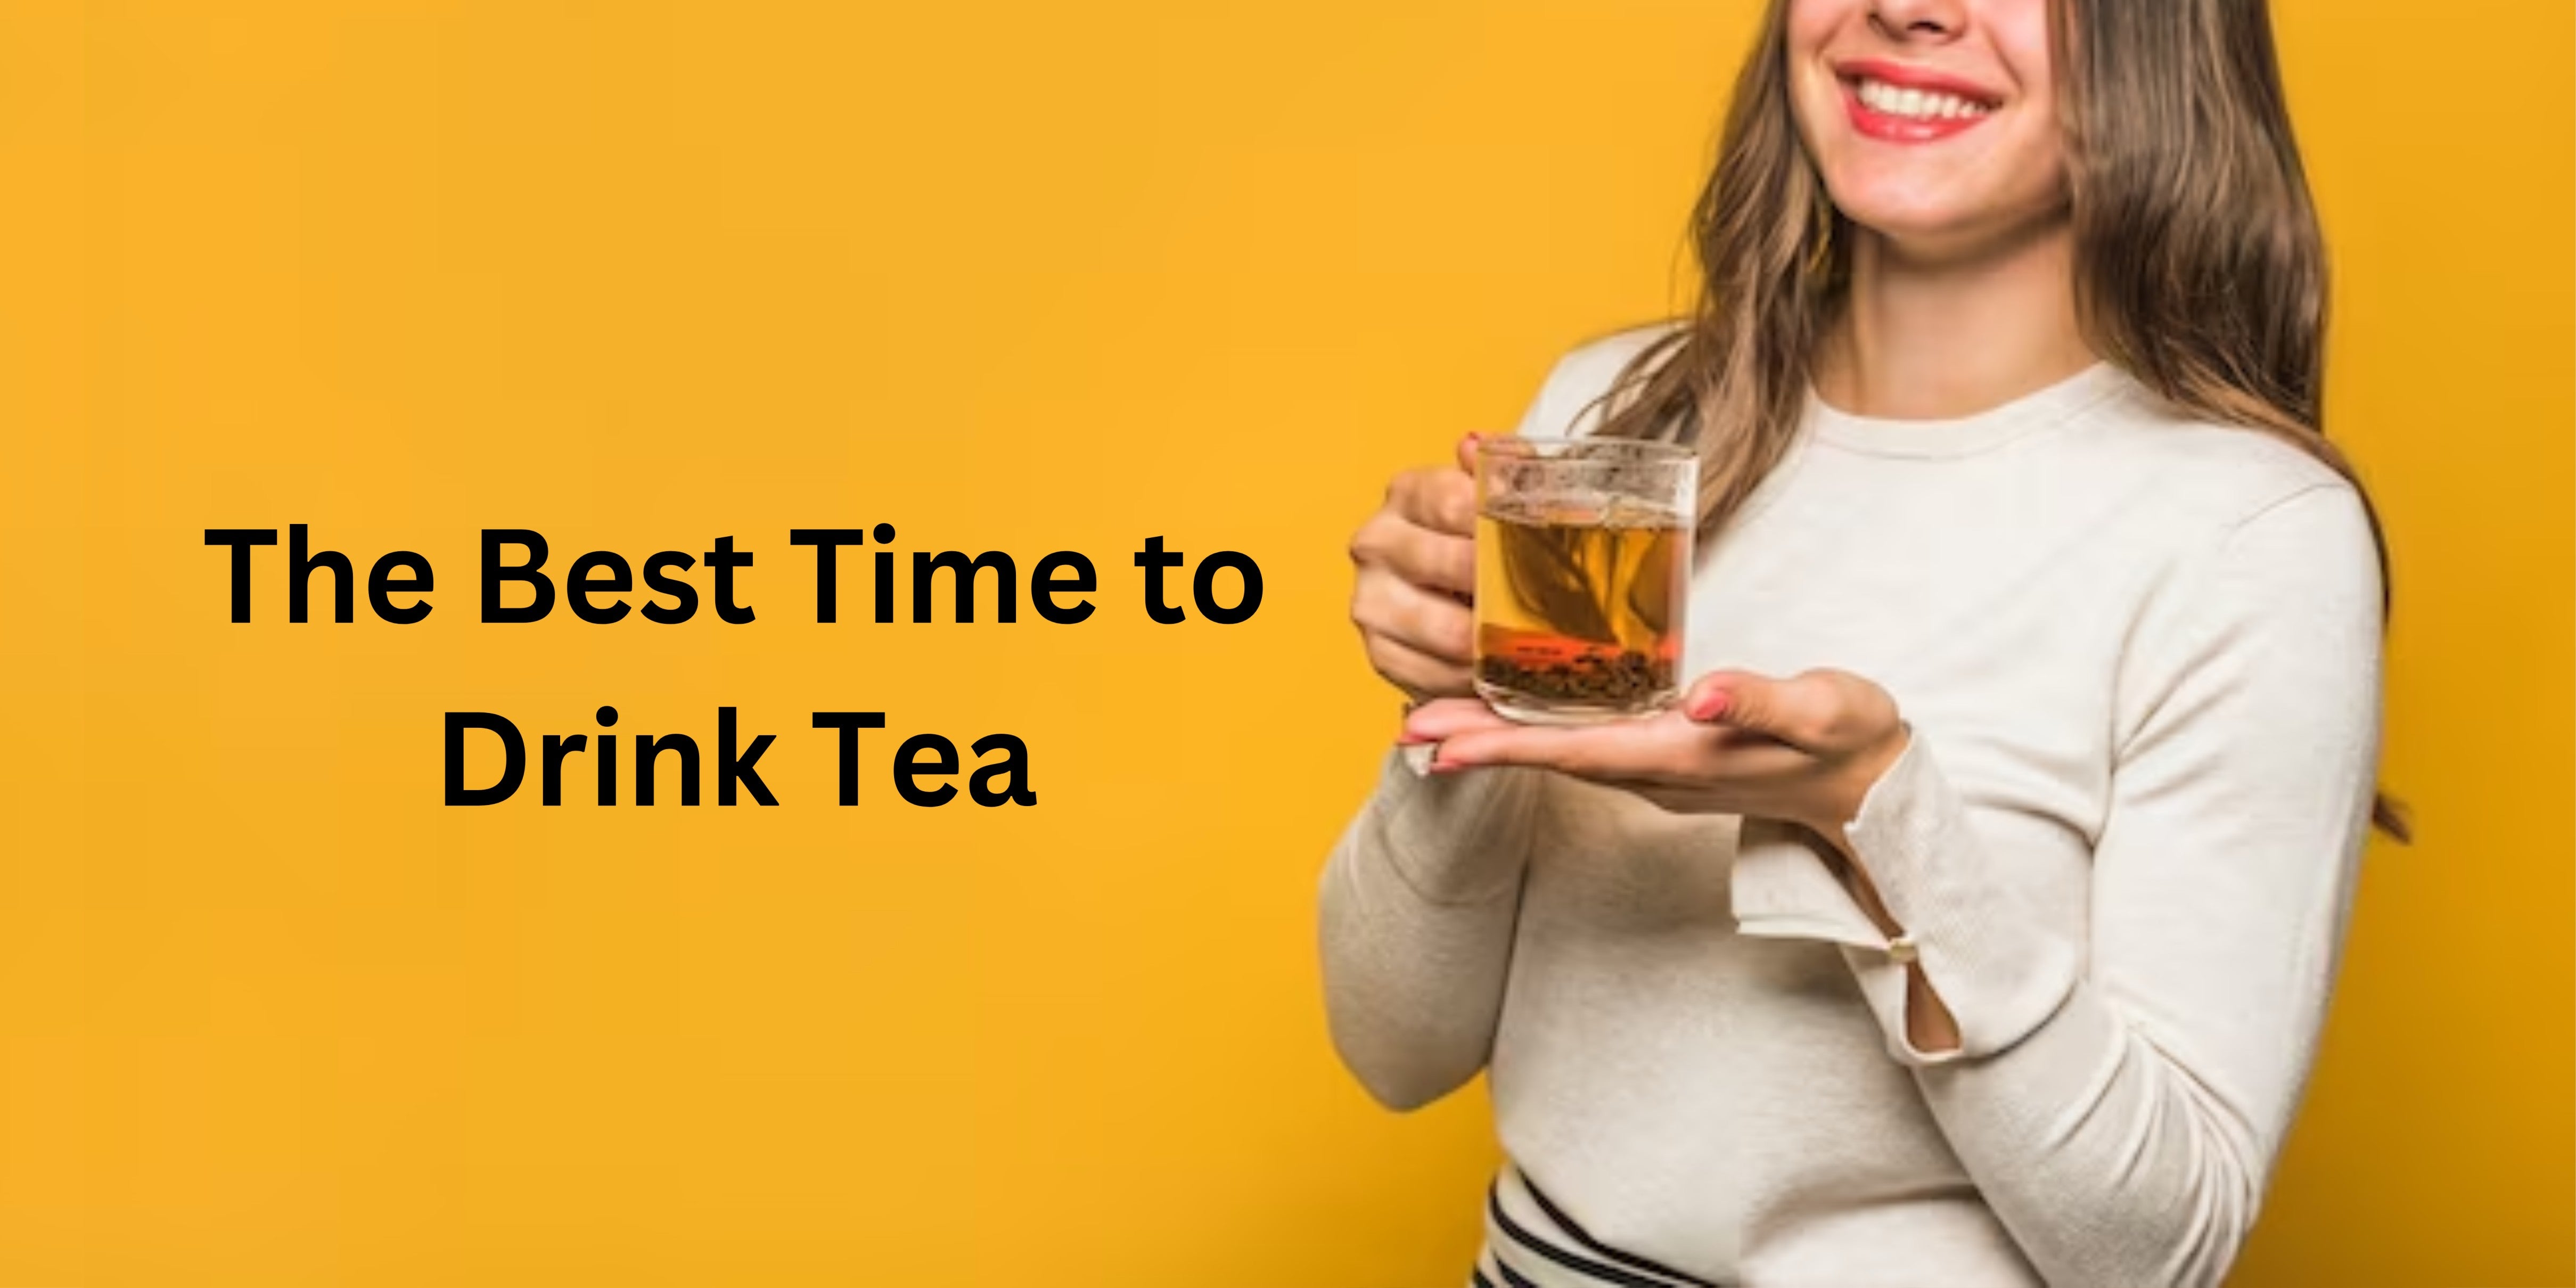 Finding Your Perfect Cup: The Best Time to Drink Tea